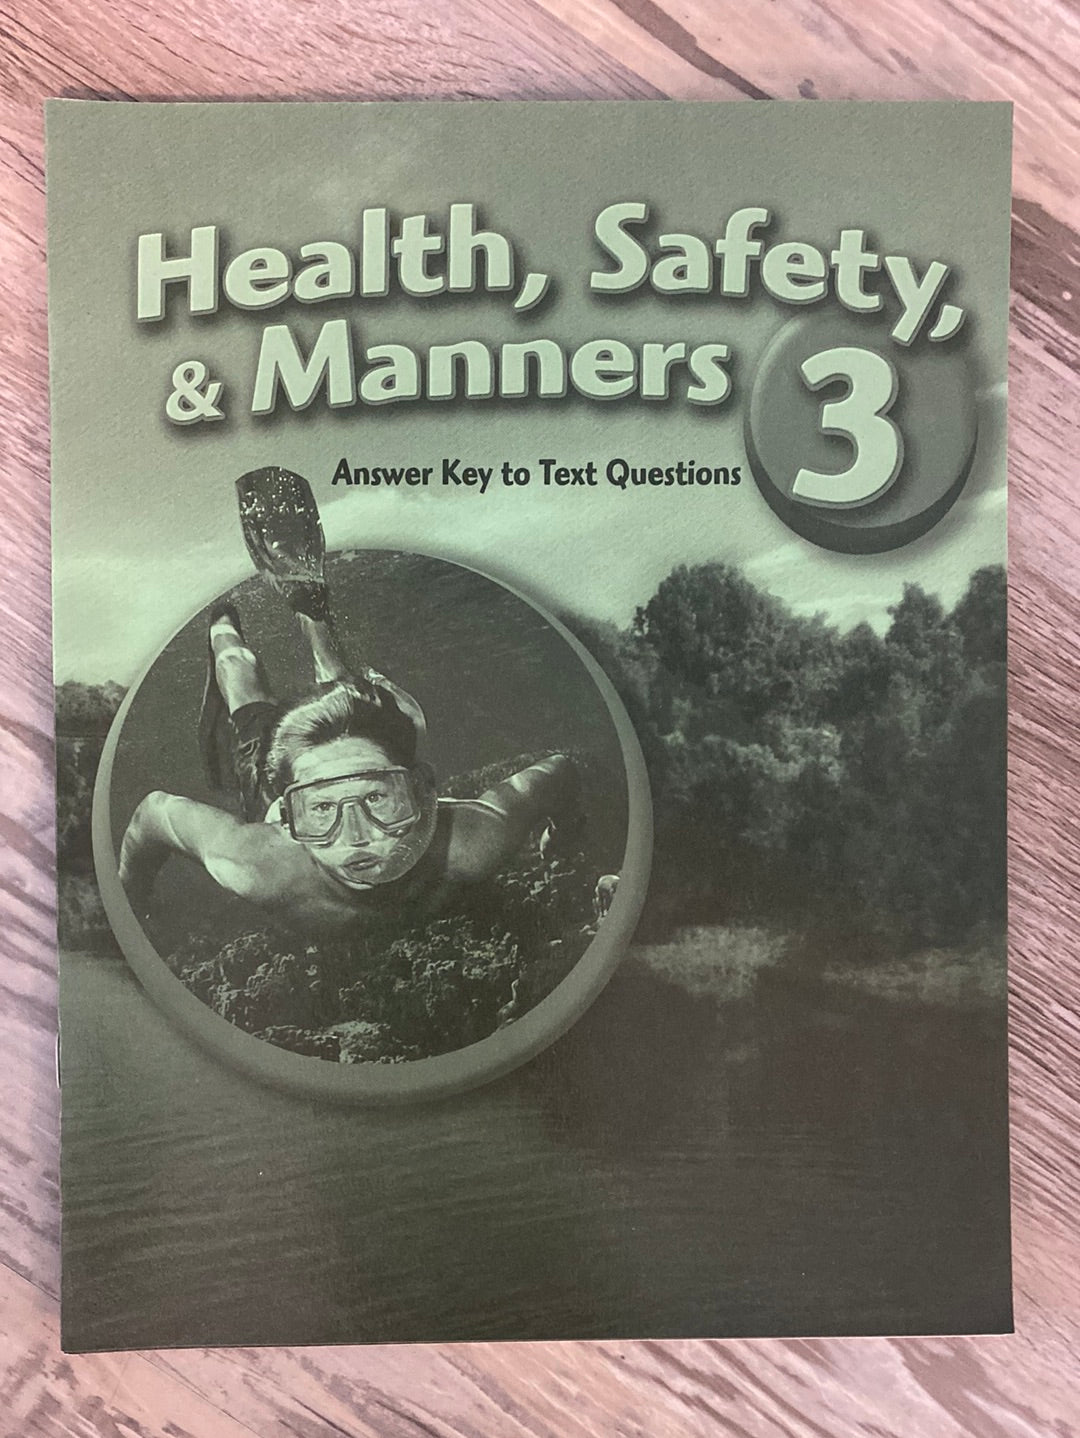 Abeka Health, Safety, & Manners 3  Set  3rd Ed